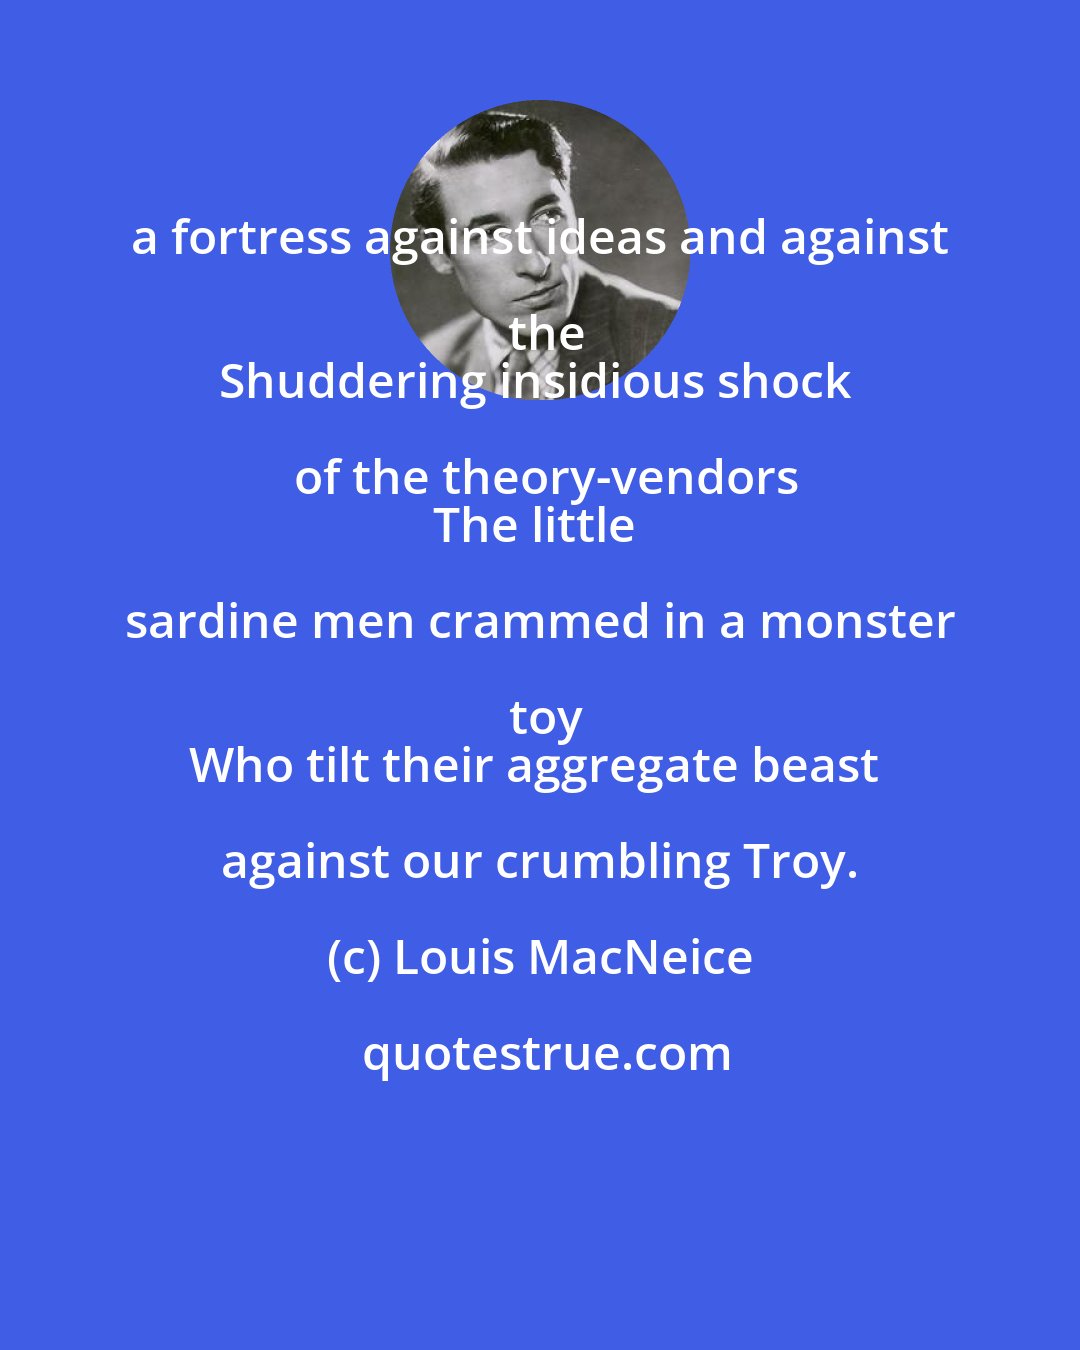 Louis MacNeice: a fortress against ideas and against the
Shuddering insidious shock of the theory-vendors
The little sardine men crammed in a monster toy
Who tilt their aggregate beast against our crumbling Troy.